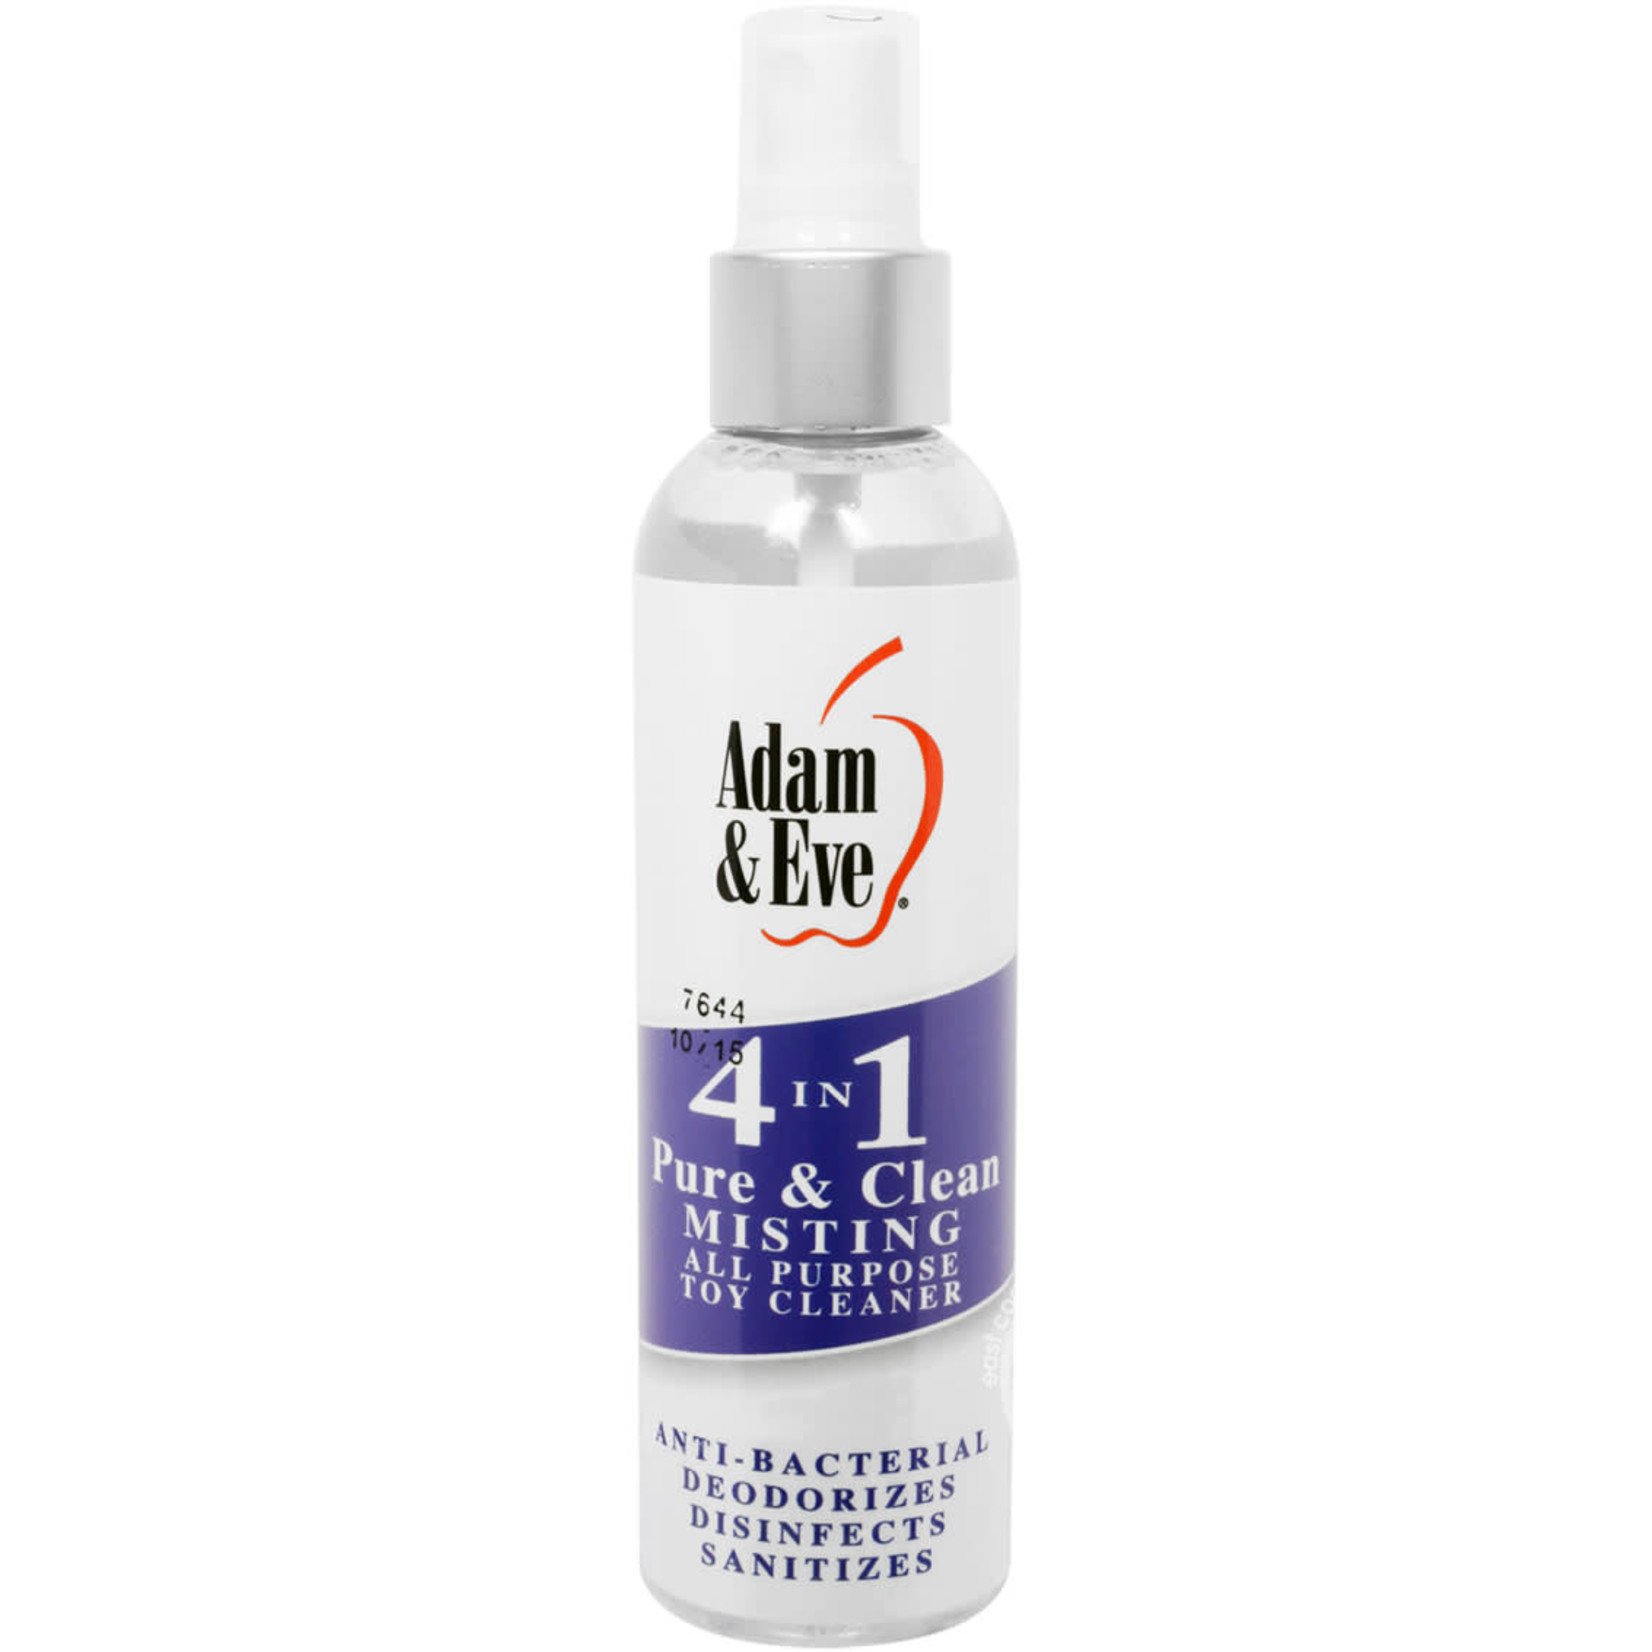 Adam & Eve 4 In 1 Pure And Clean Misting All Purpose Toy Cleaner 4oz